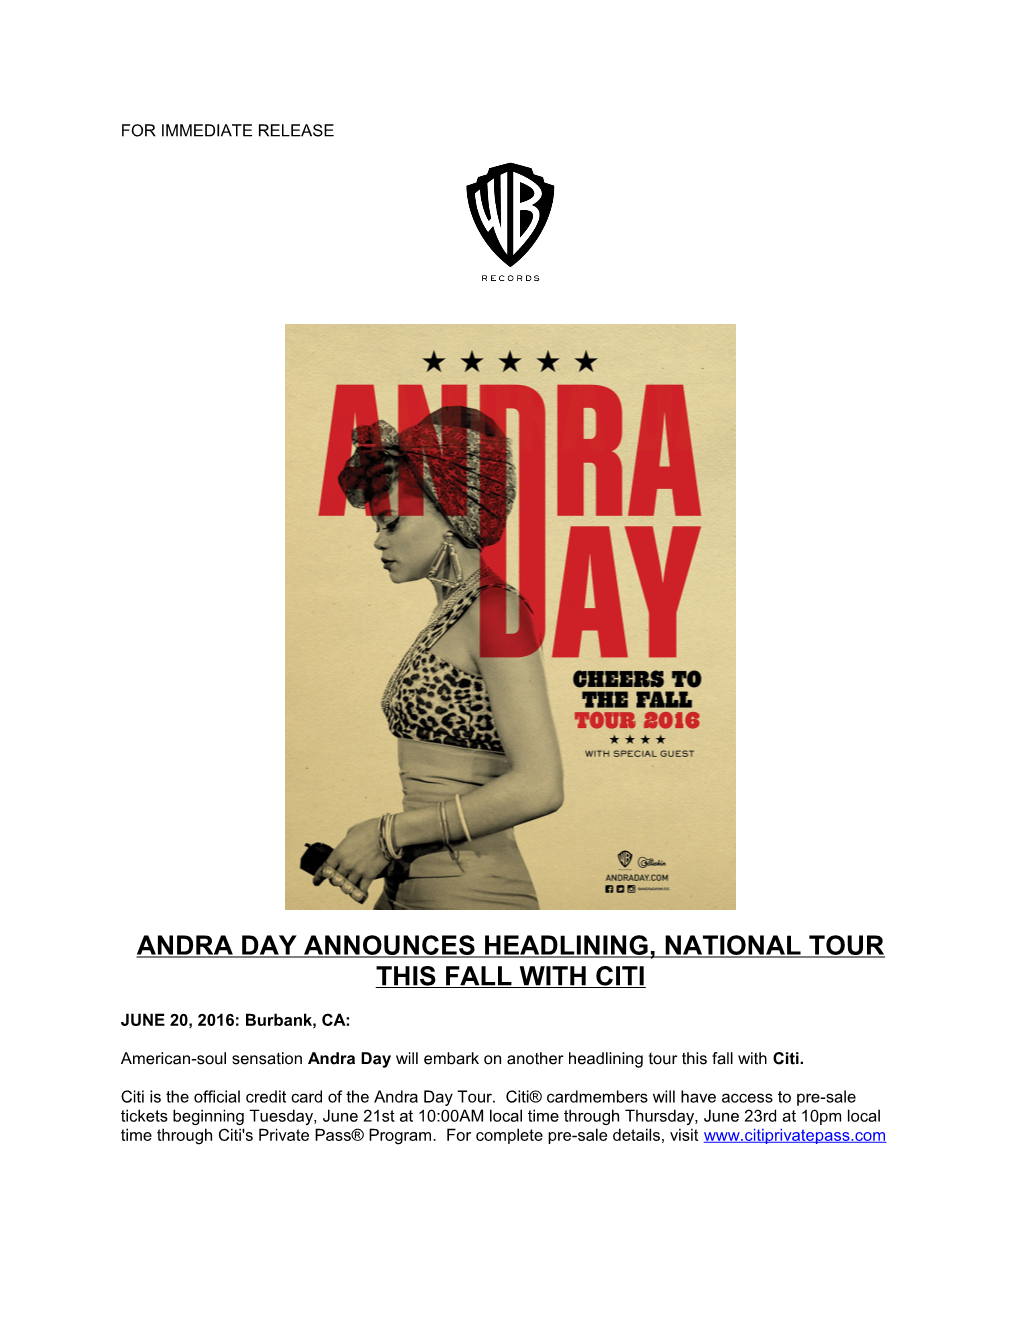 Andra Day Announces Headlining,National Tour This Fall with Citi